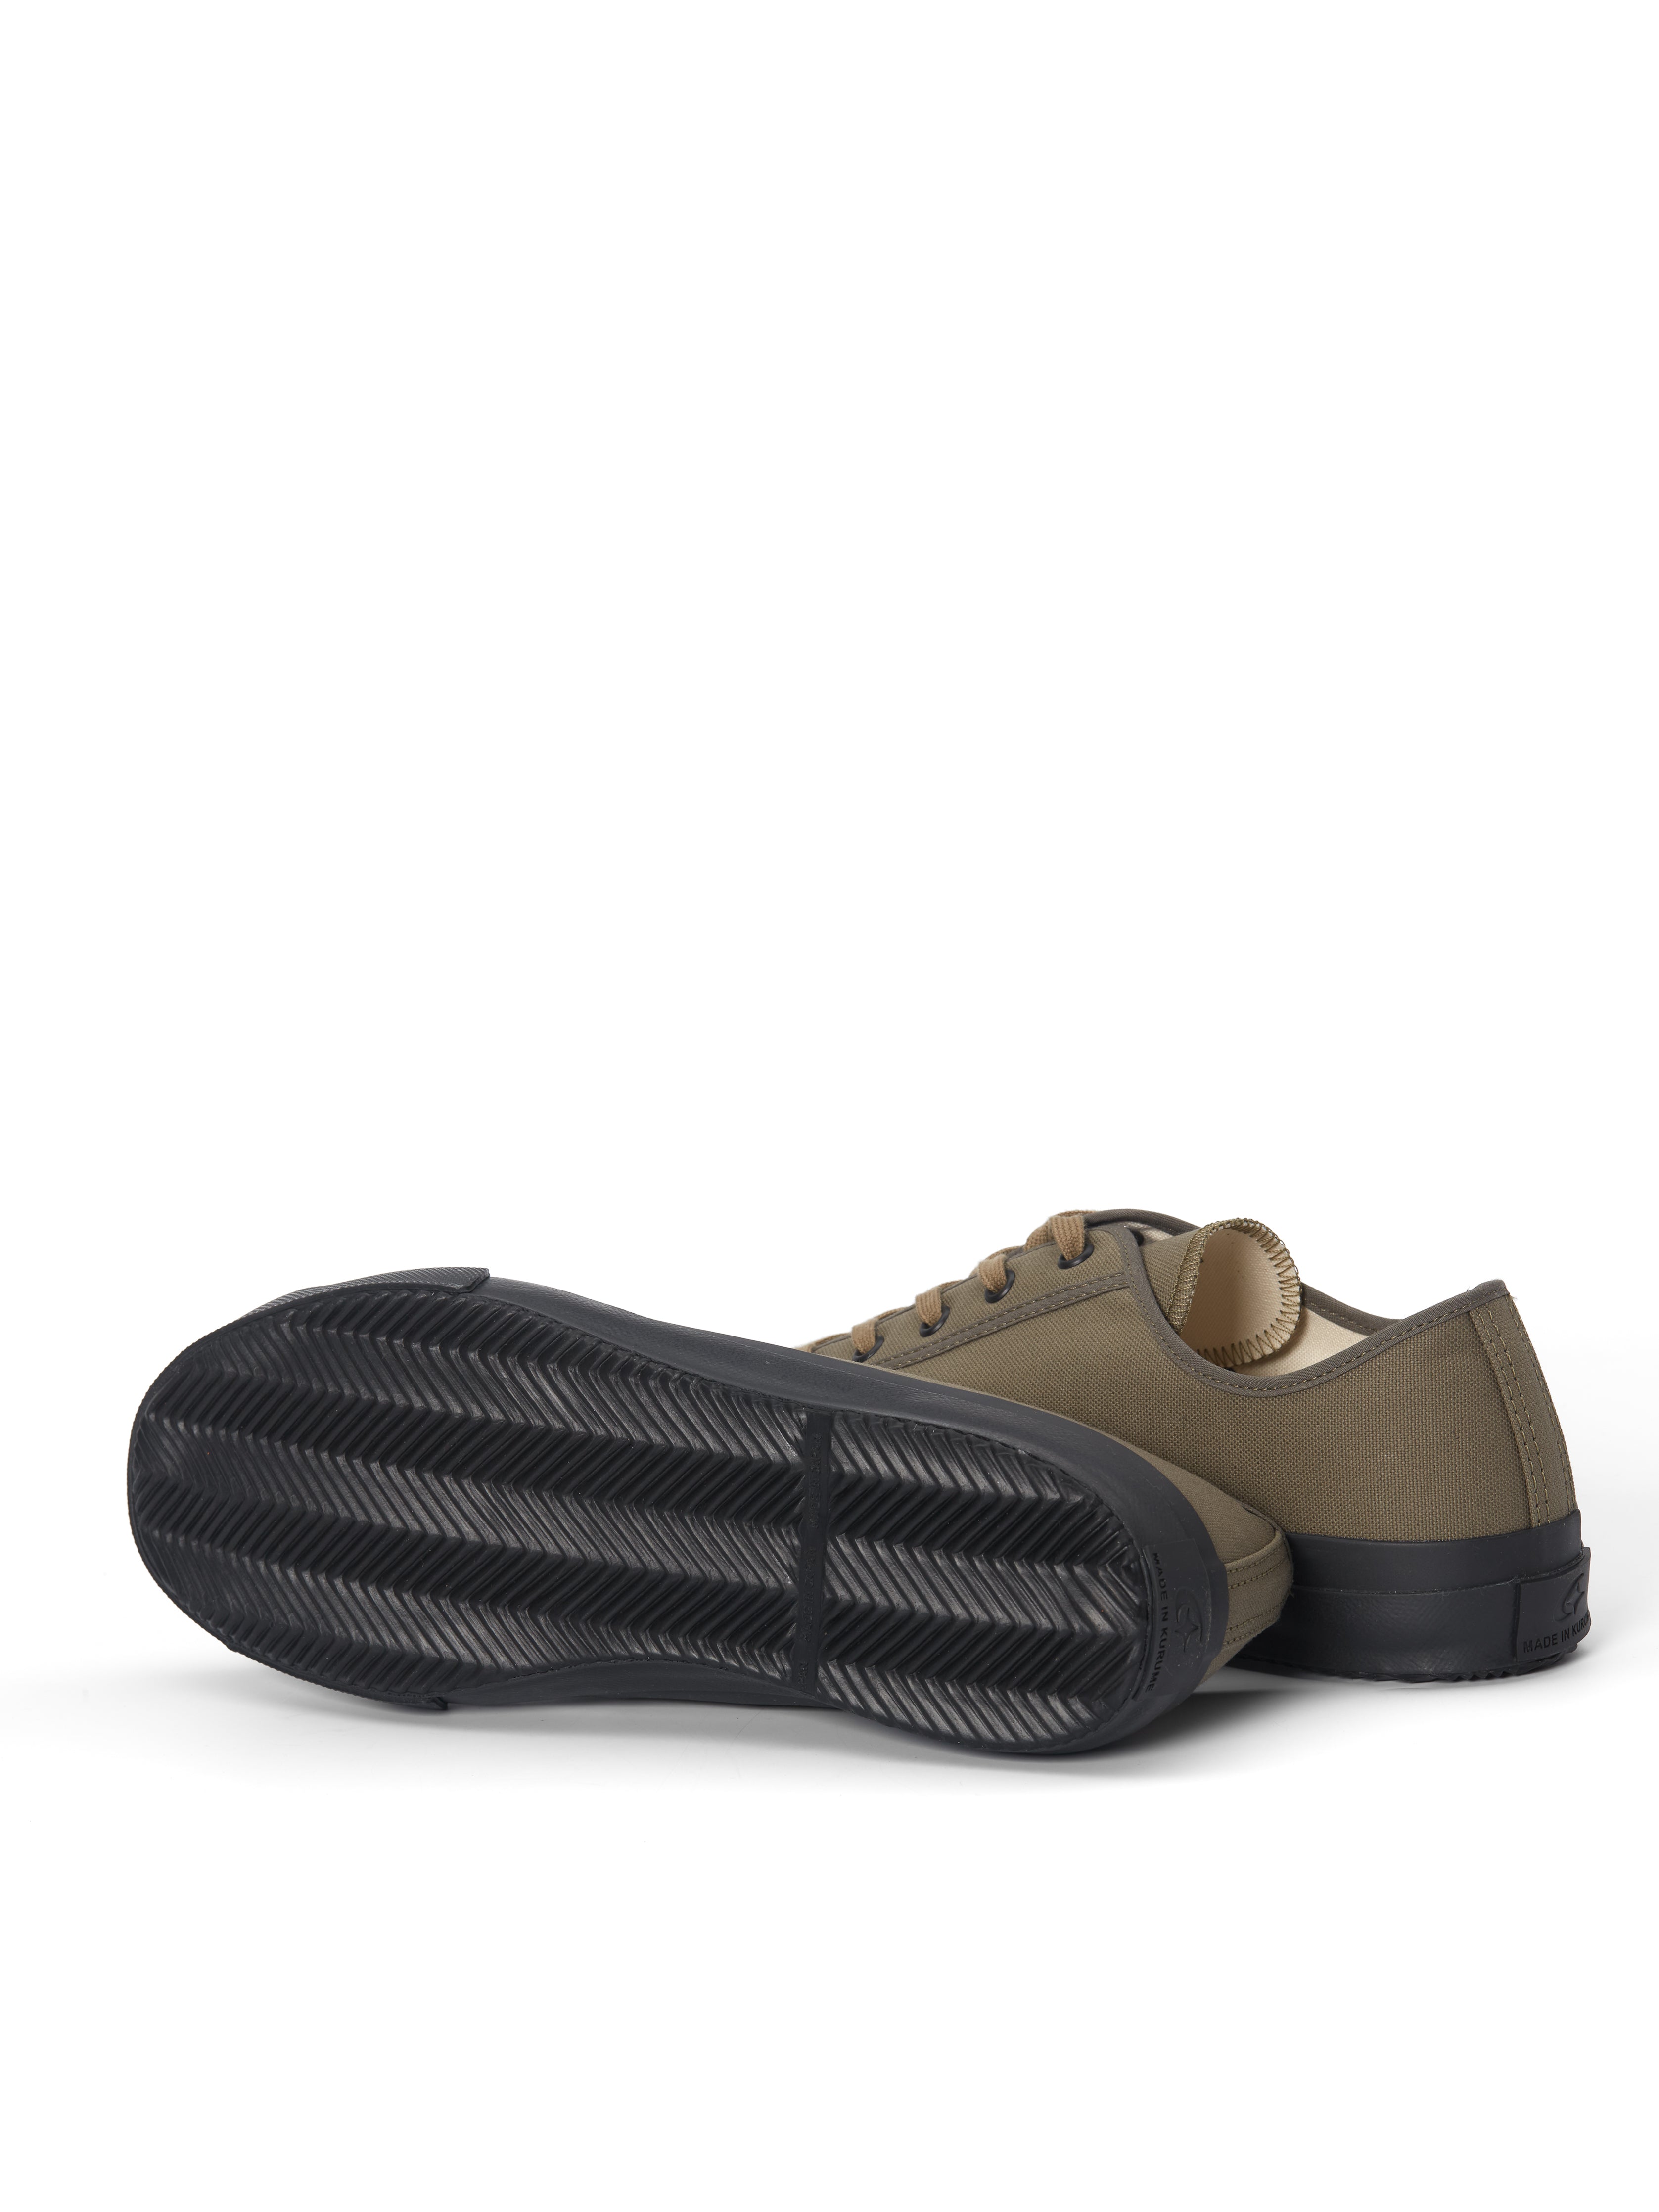 Moonstar Gym Classic Olive